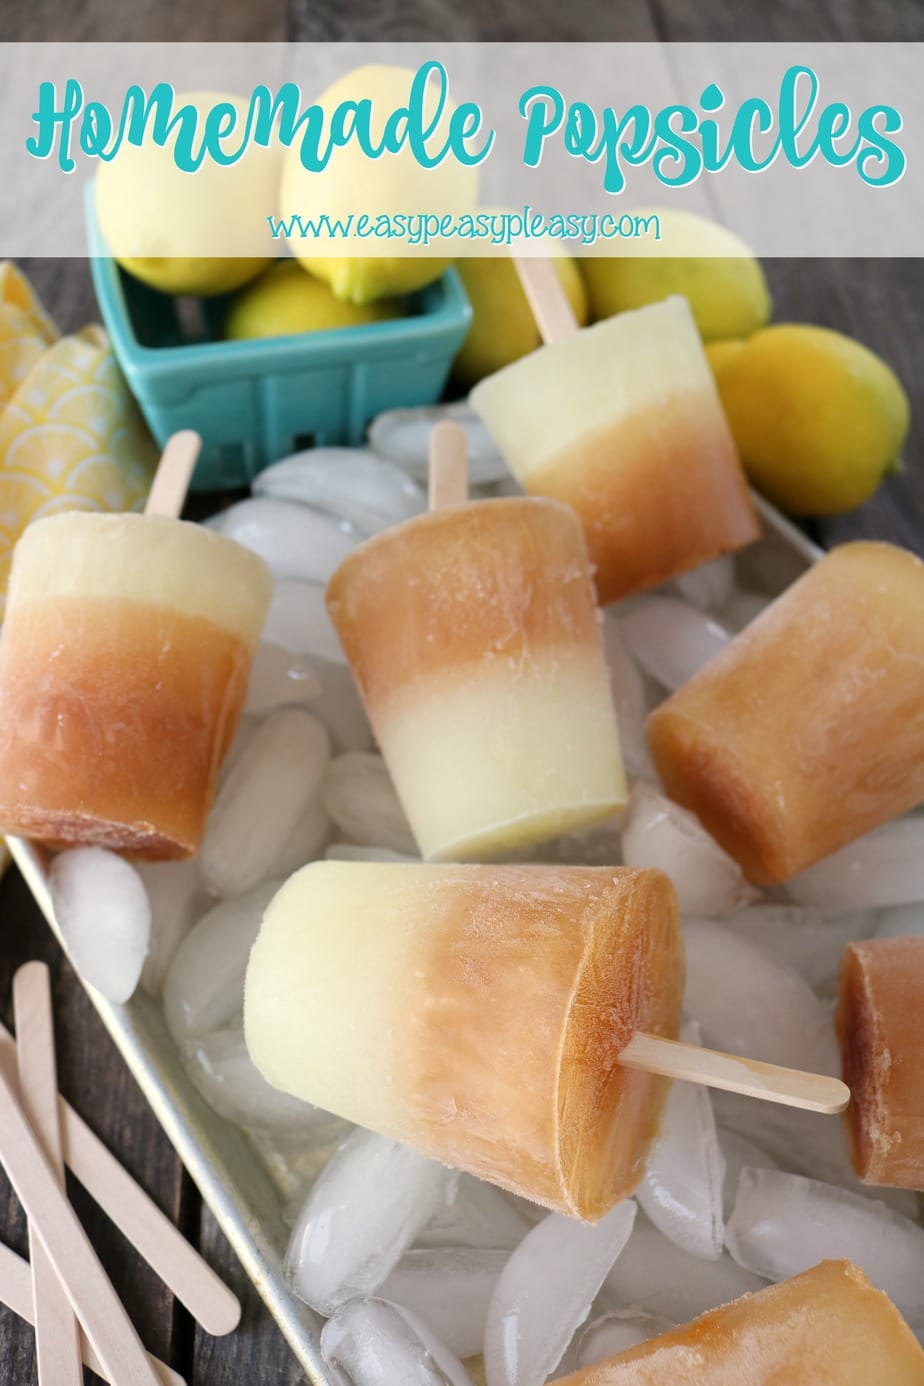 You can make these easy popsicles at home. Check out how this easy homemade popsicle recipe that will be kid approved all summer long!